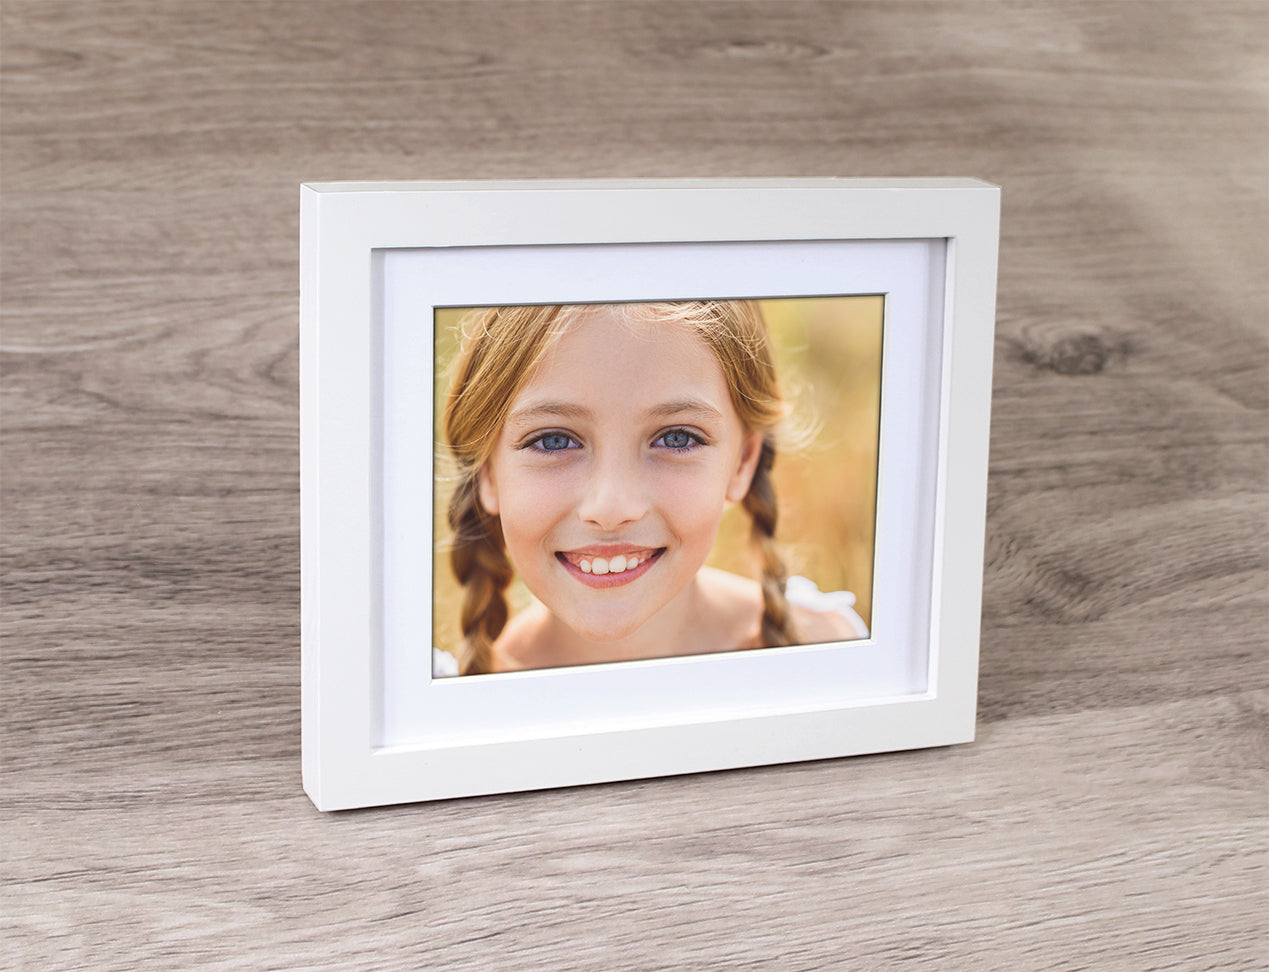 Framed Photo of girl, with thick white frame and white mat board